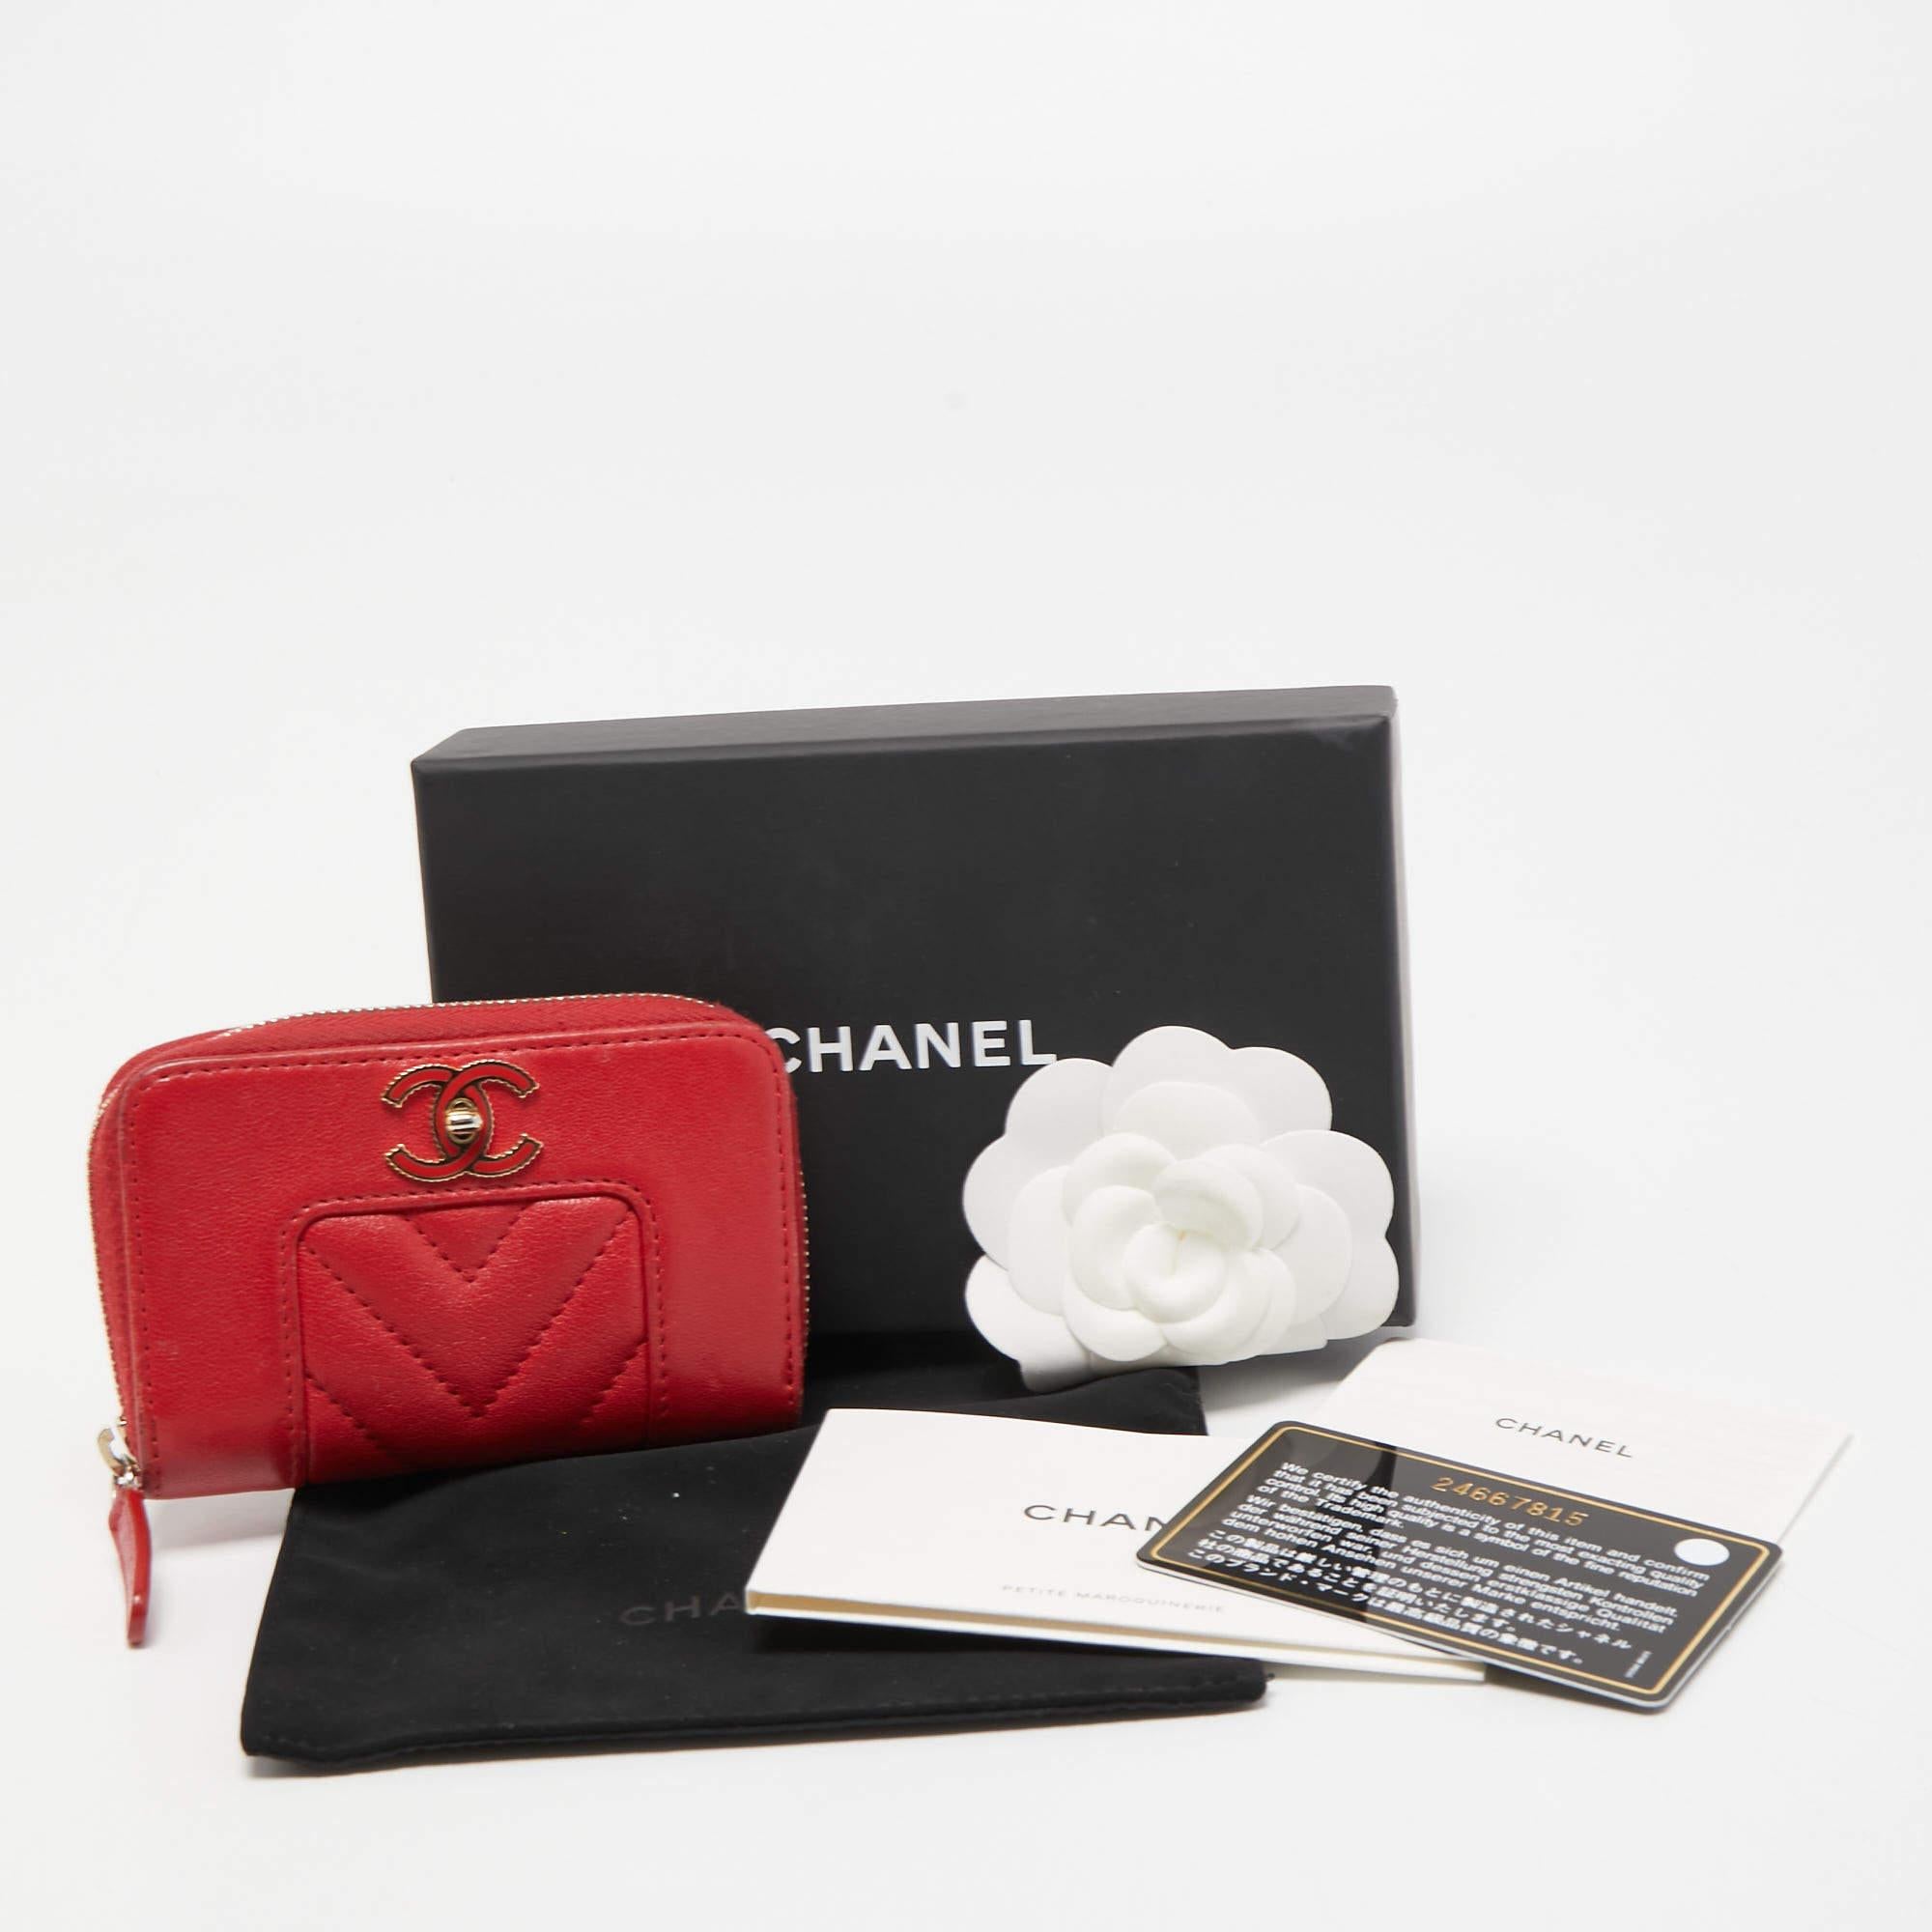 Chanel Red Chevron Leather Mademoiselle Compact Wallet 7